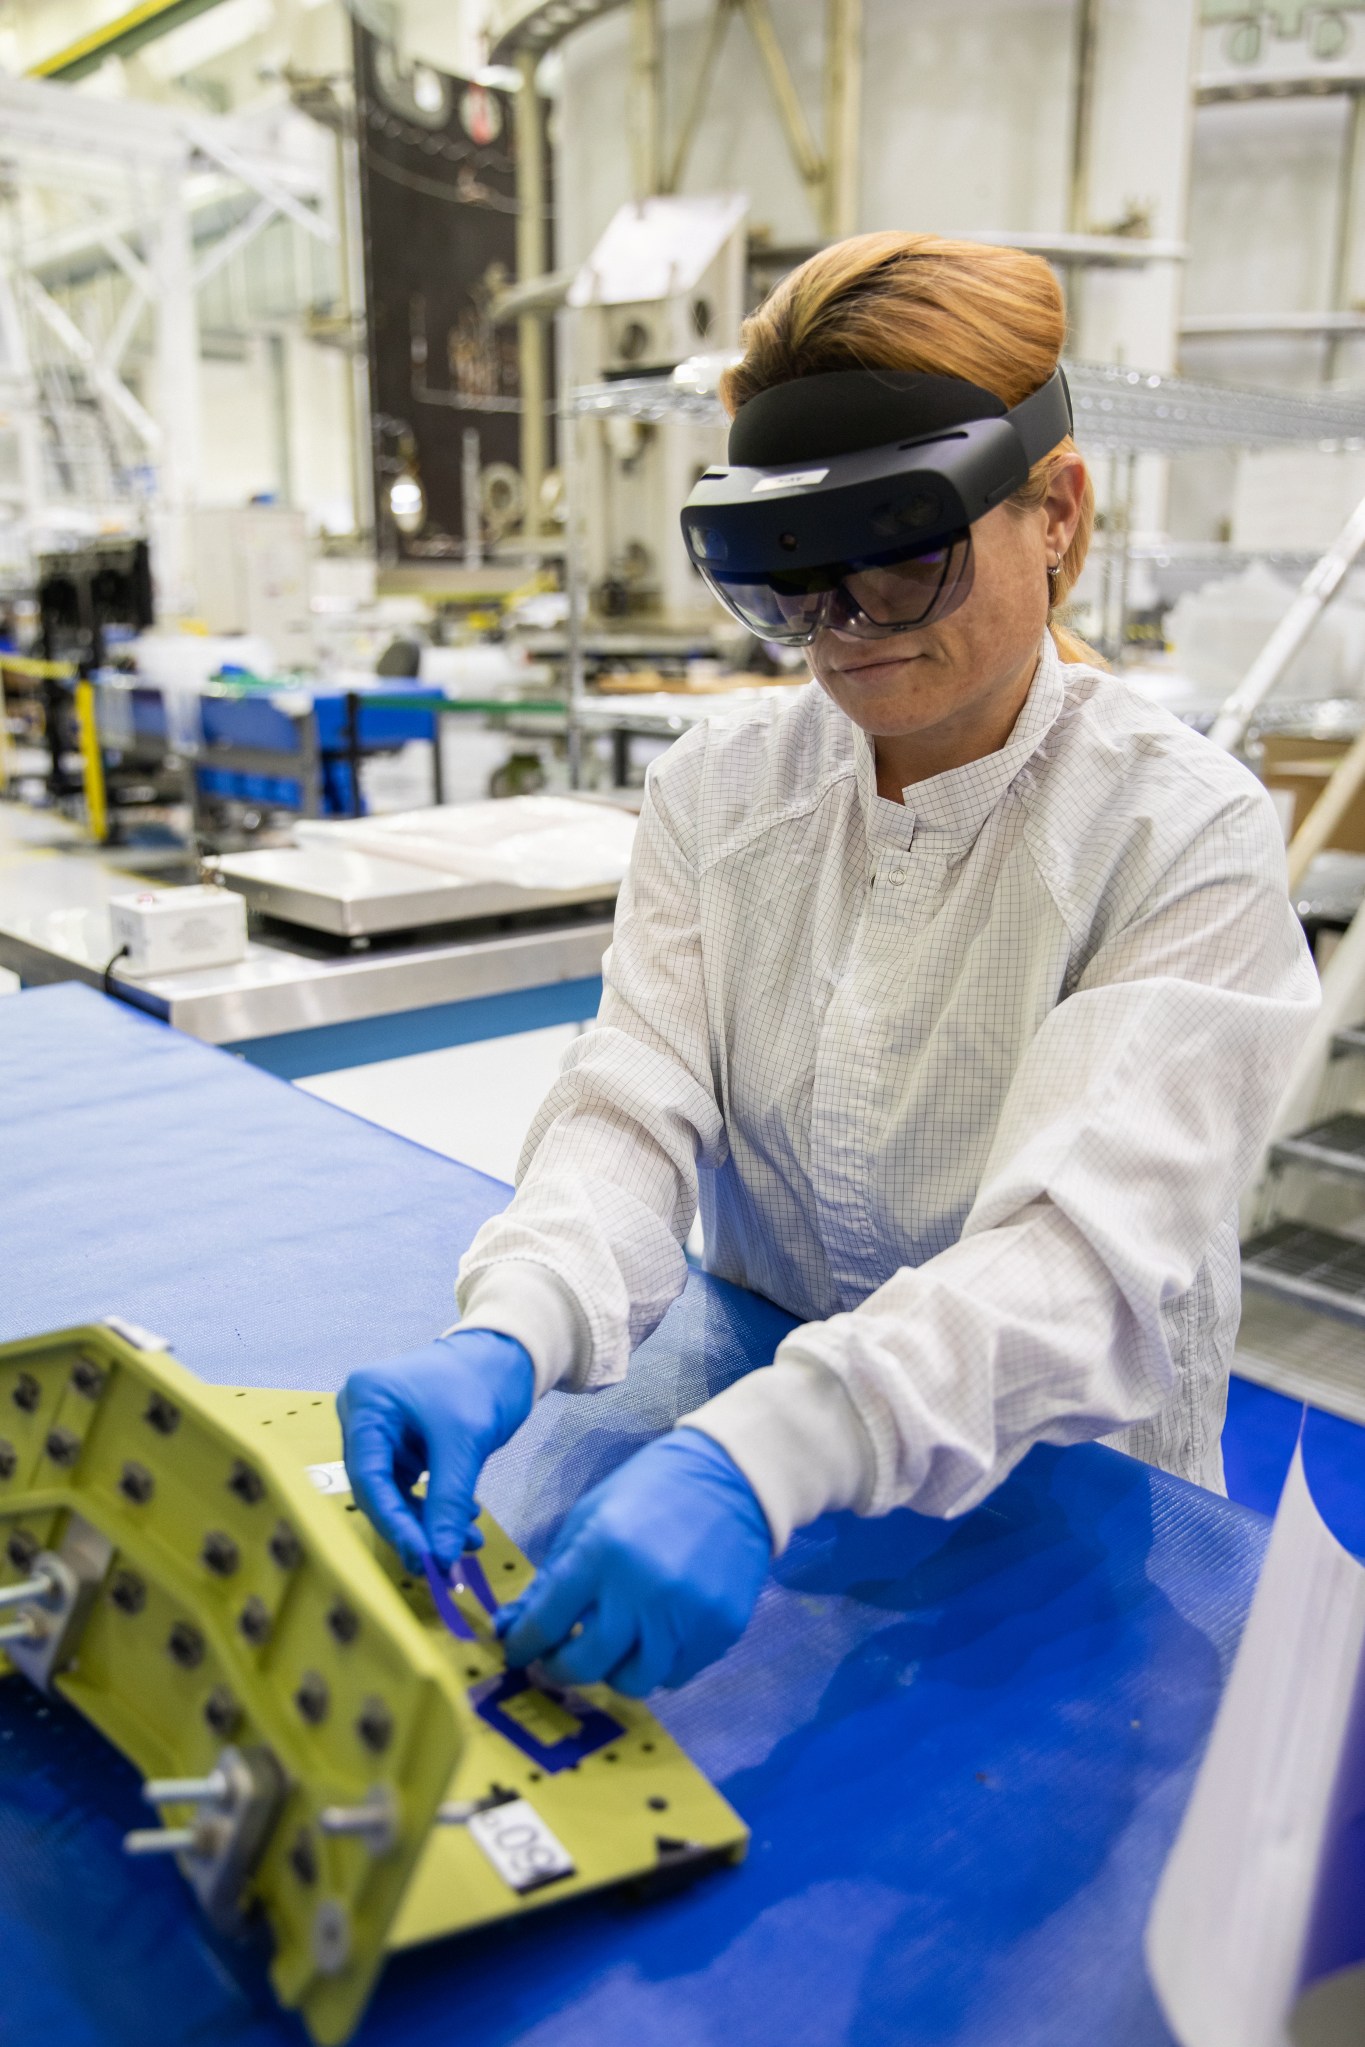 A technician wears augmented reality goggles to work on crew module hardware at NASA's Kennedy Space Center in Florida.